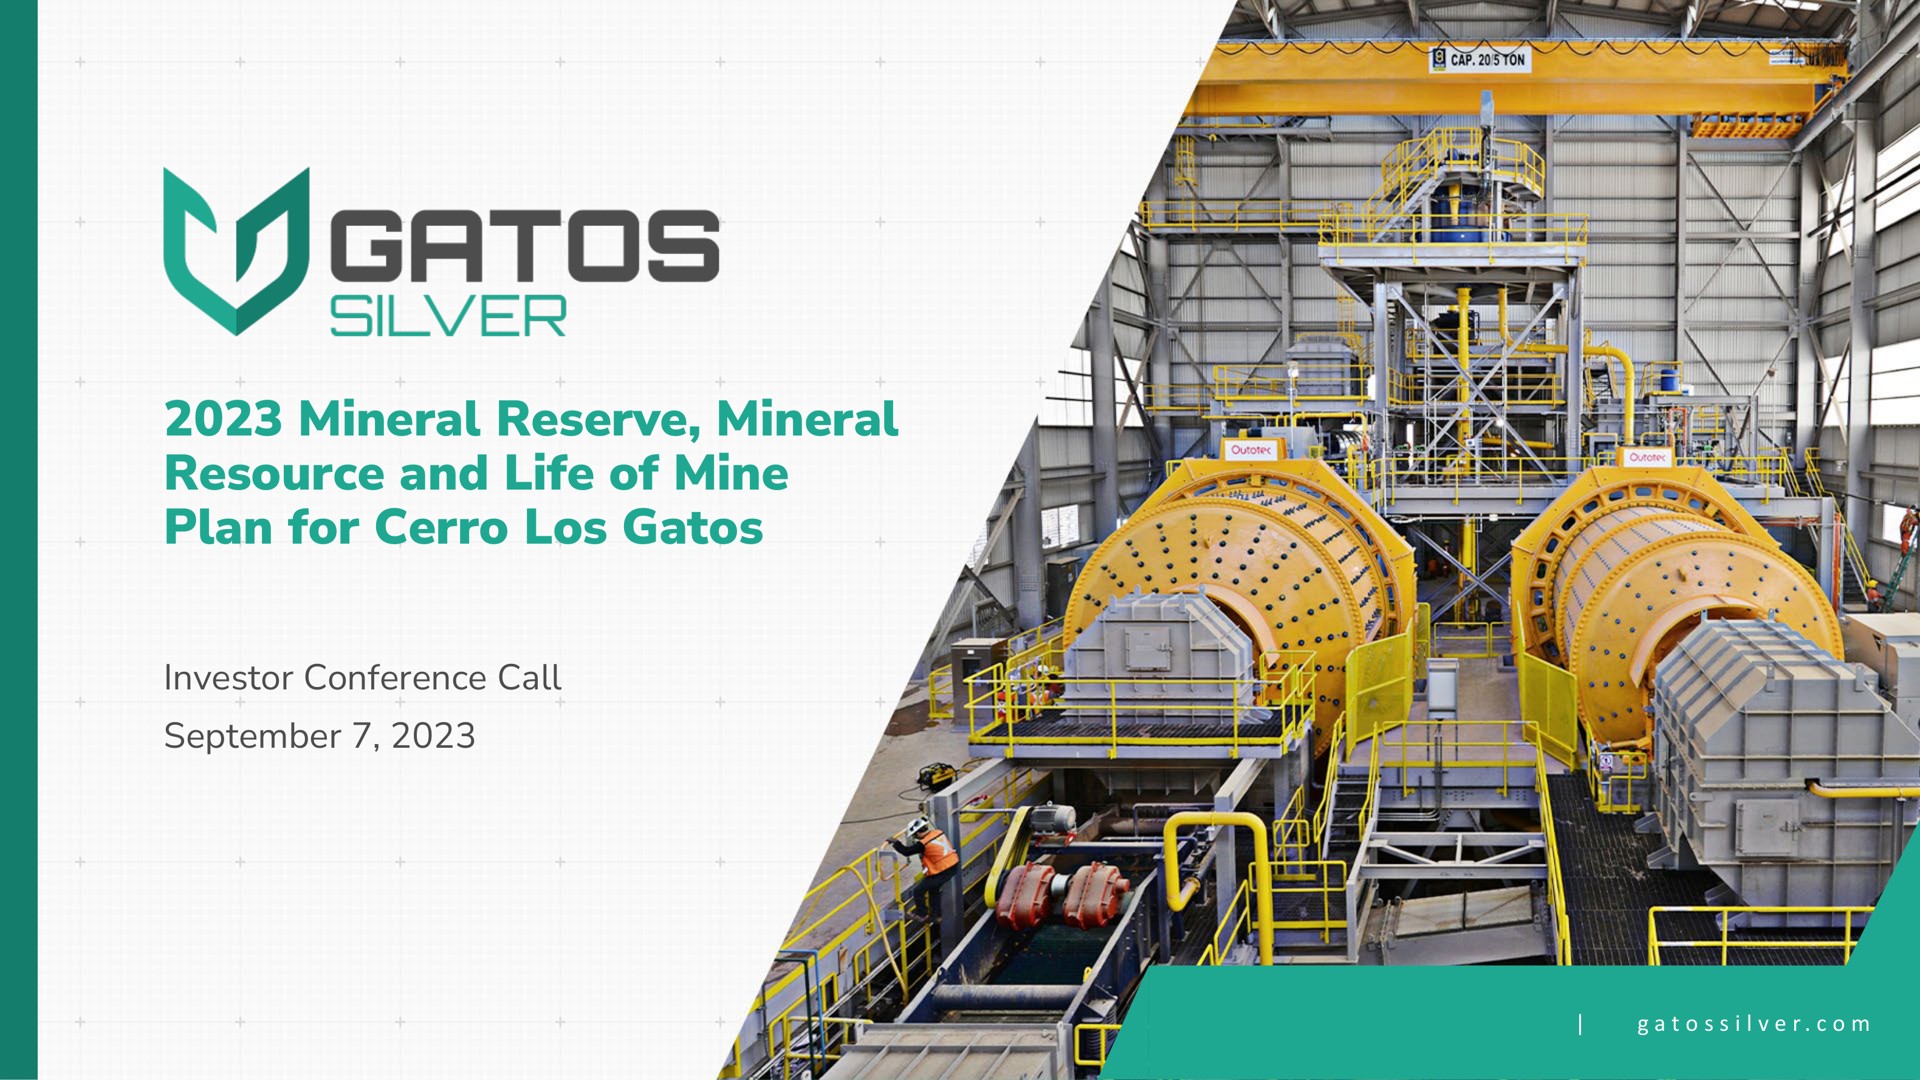 mineral reserve mineral resource and life of mine plan for investor conference call sie | Gatos Silver